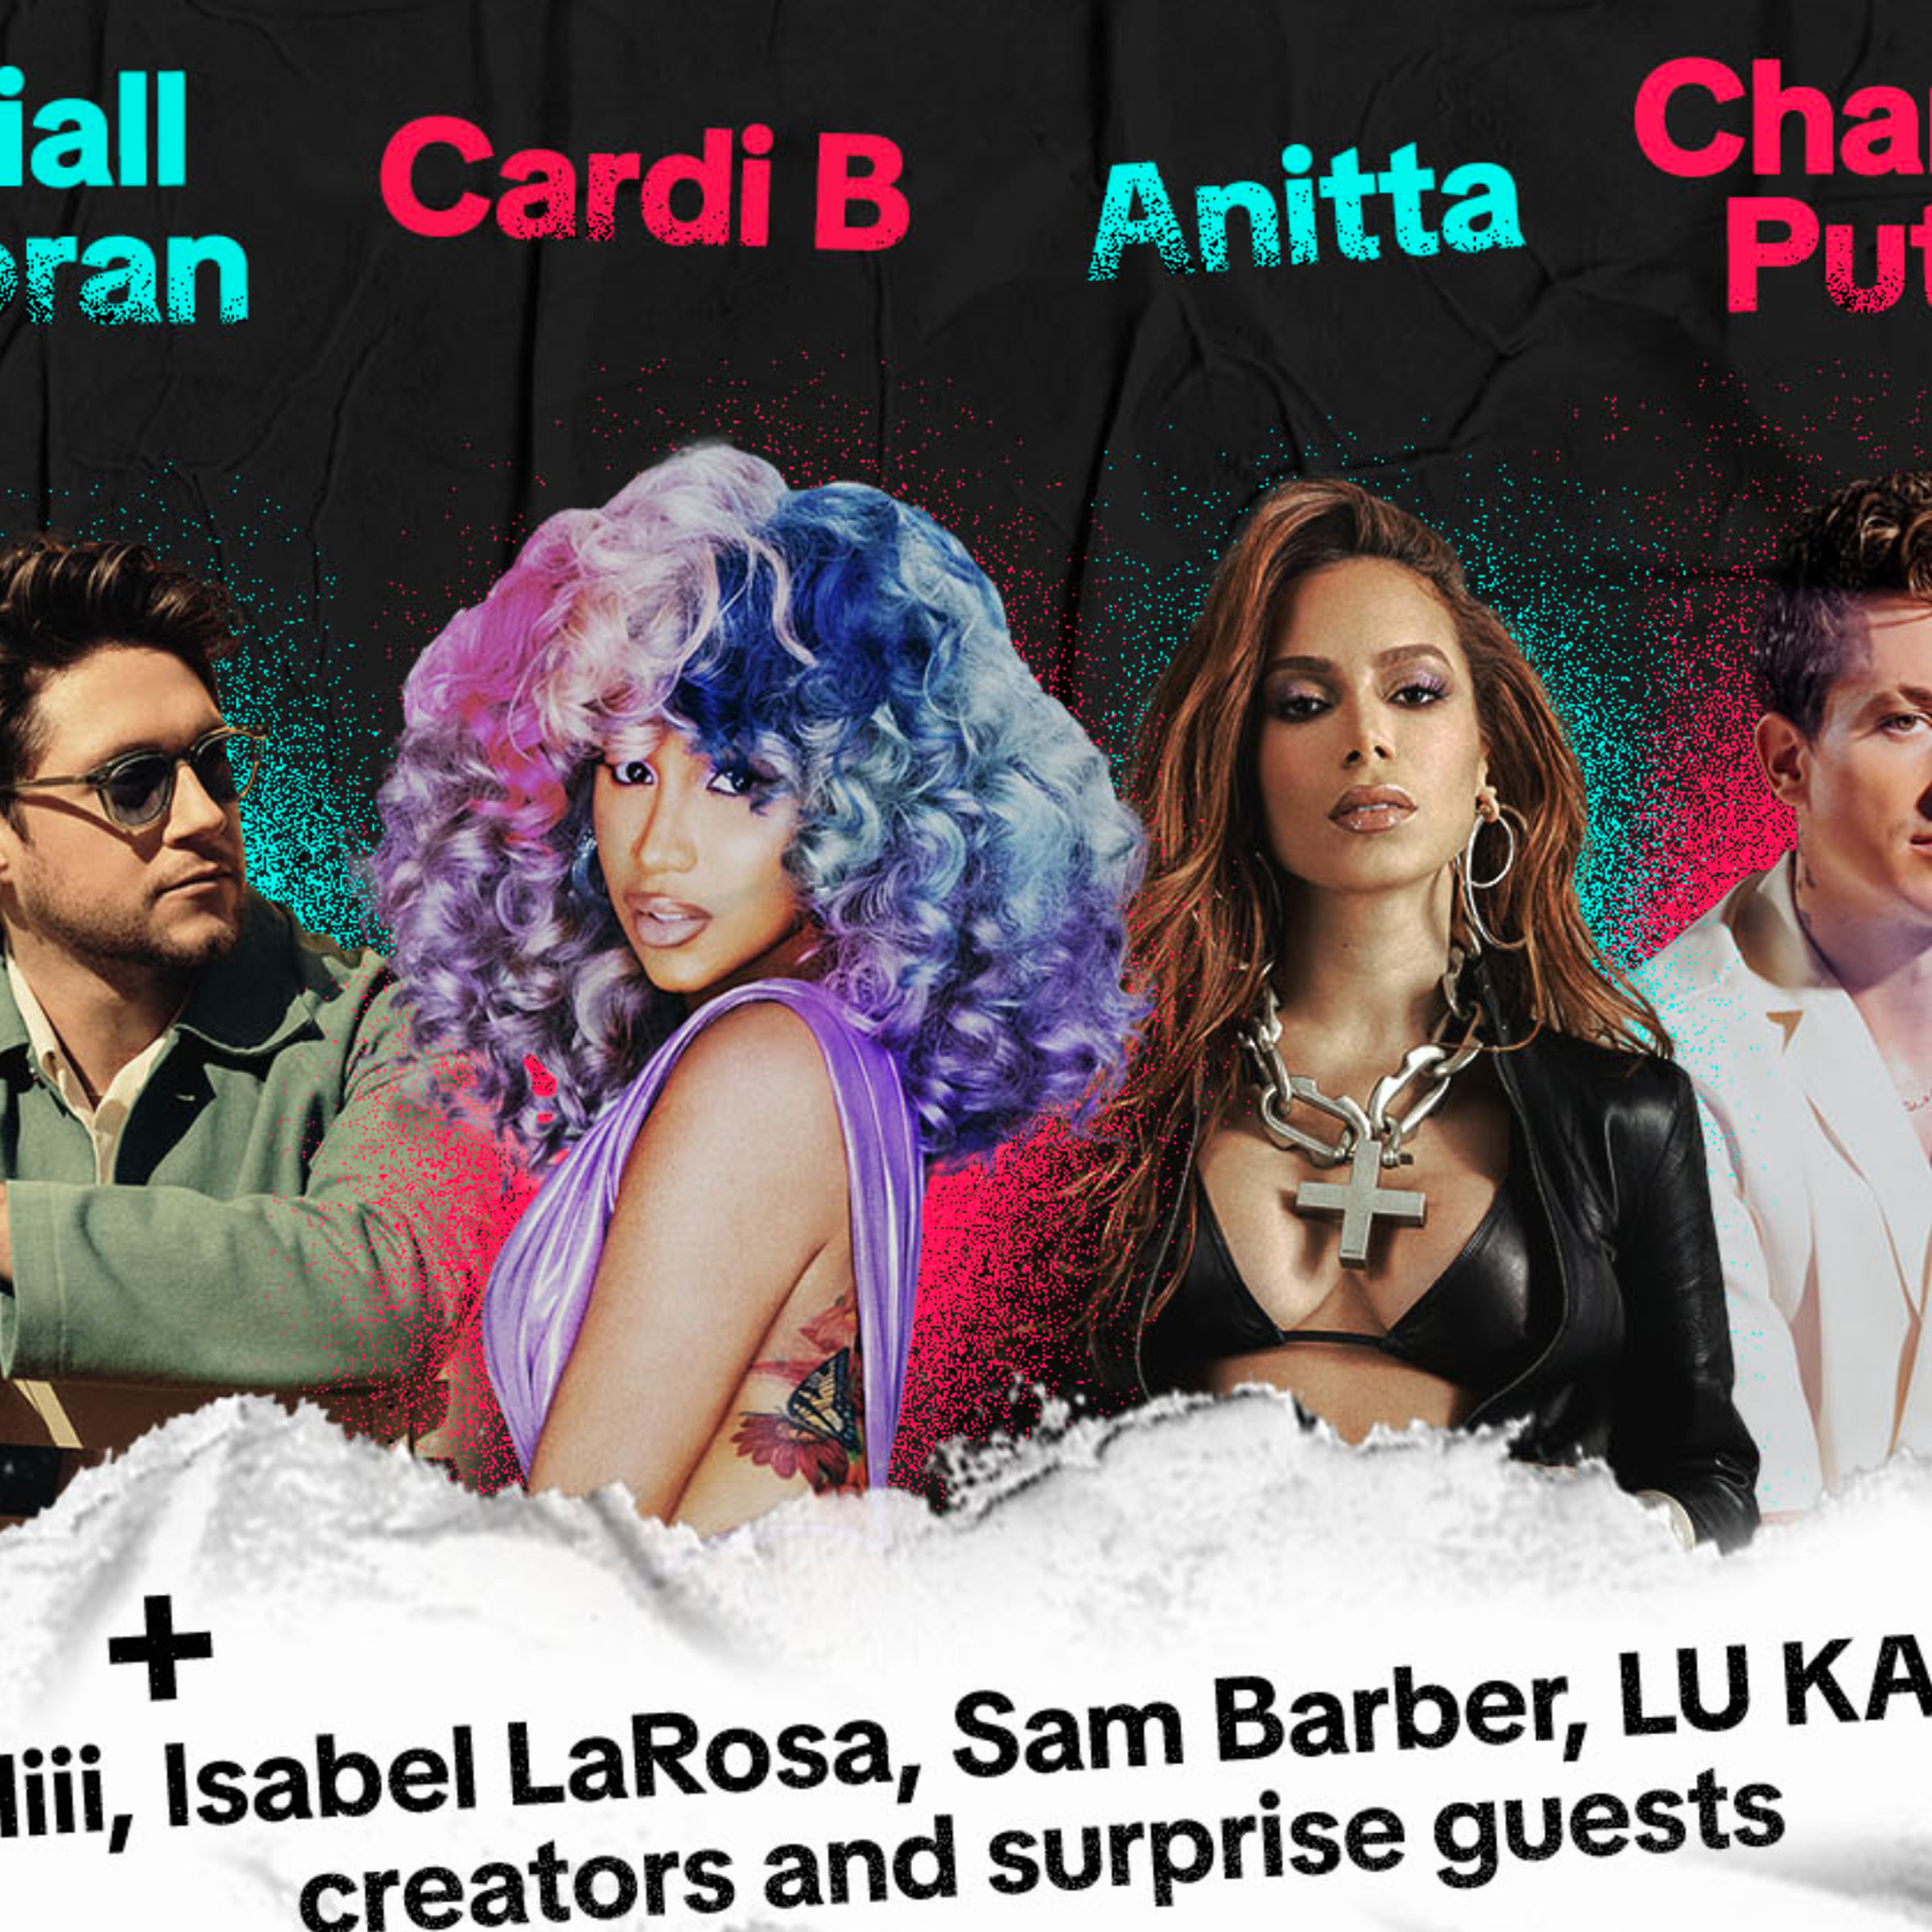 A promotional poster for the TikTok in the Mix music festival, with Niall Horan, Cardi B, Anita, and Charlie Puth showcased.